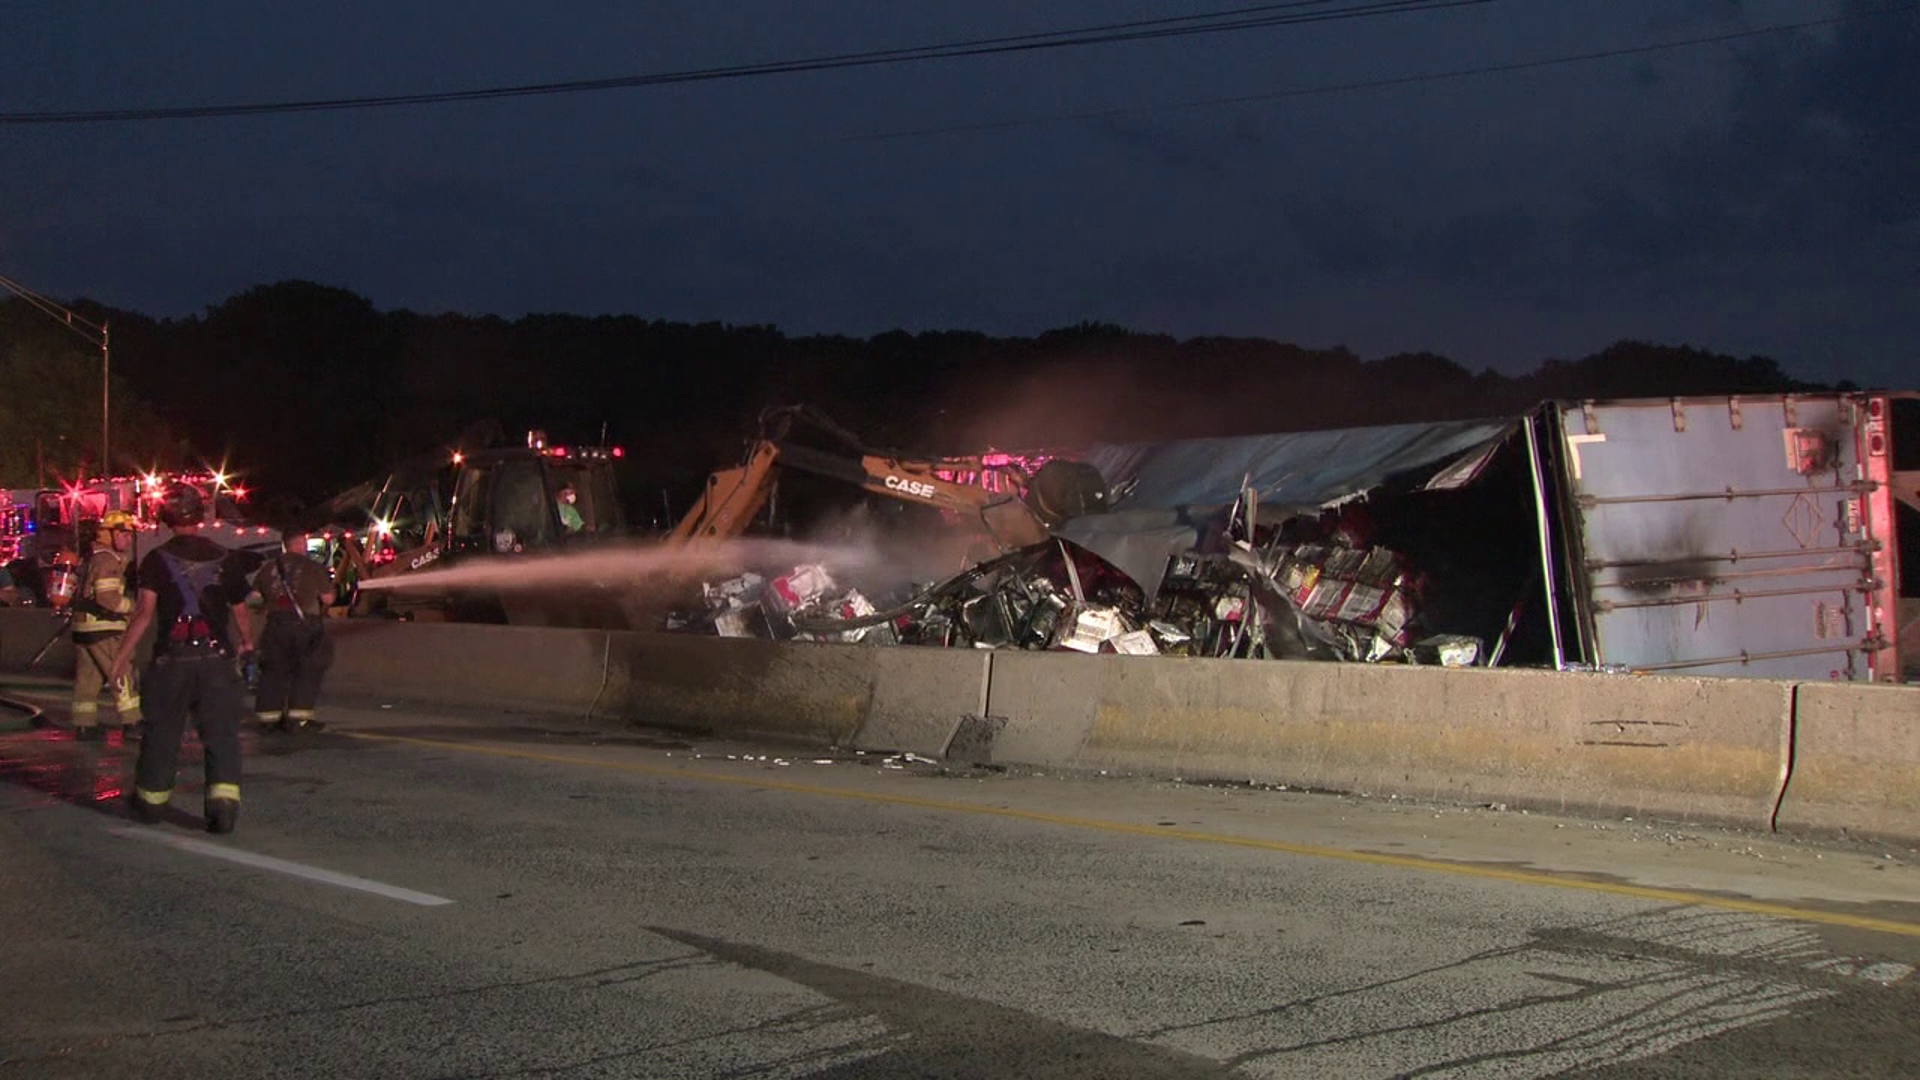 A tractor-trailer caught fire on I-80 in Stroud Township on Friday evening.